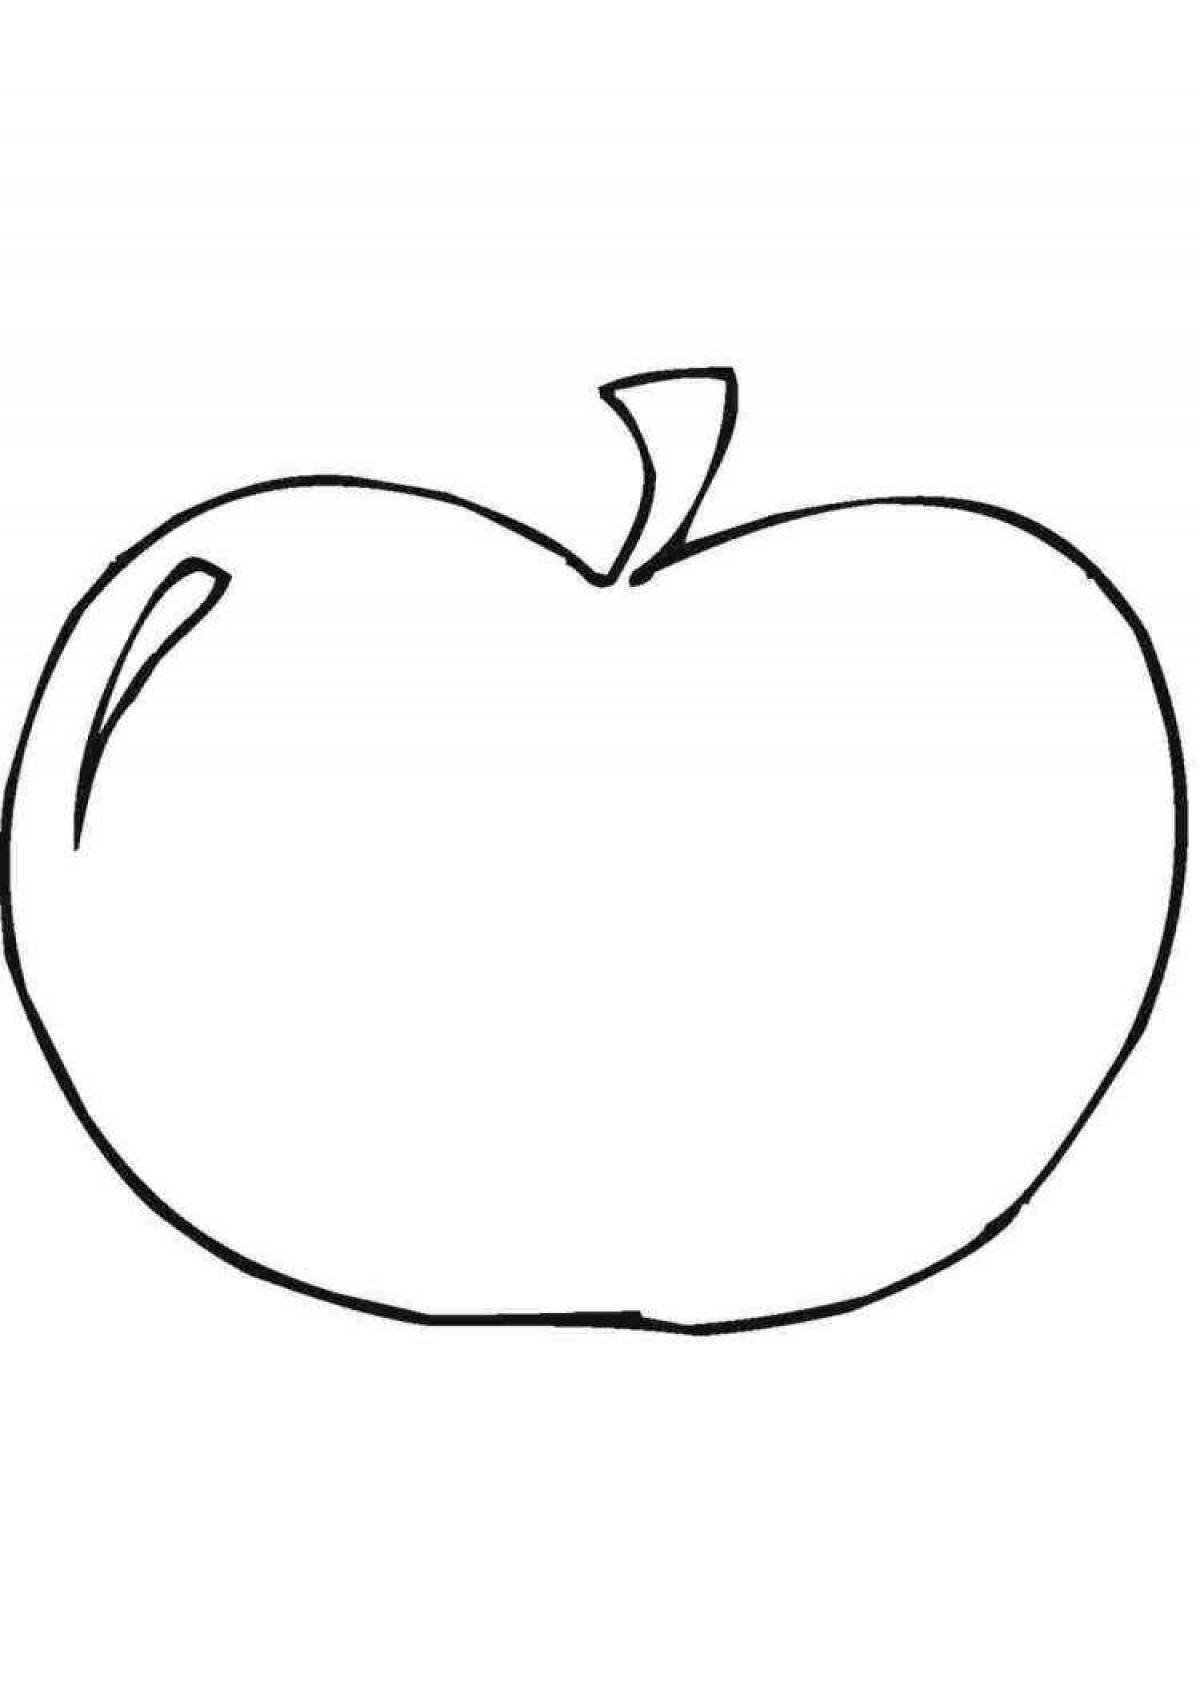 Coloring book colorful drawing of an apple